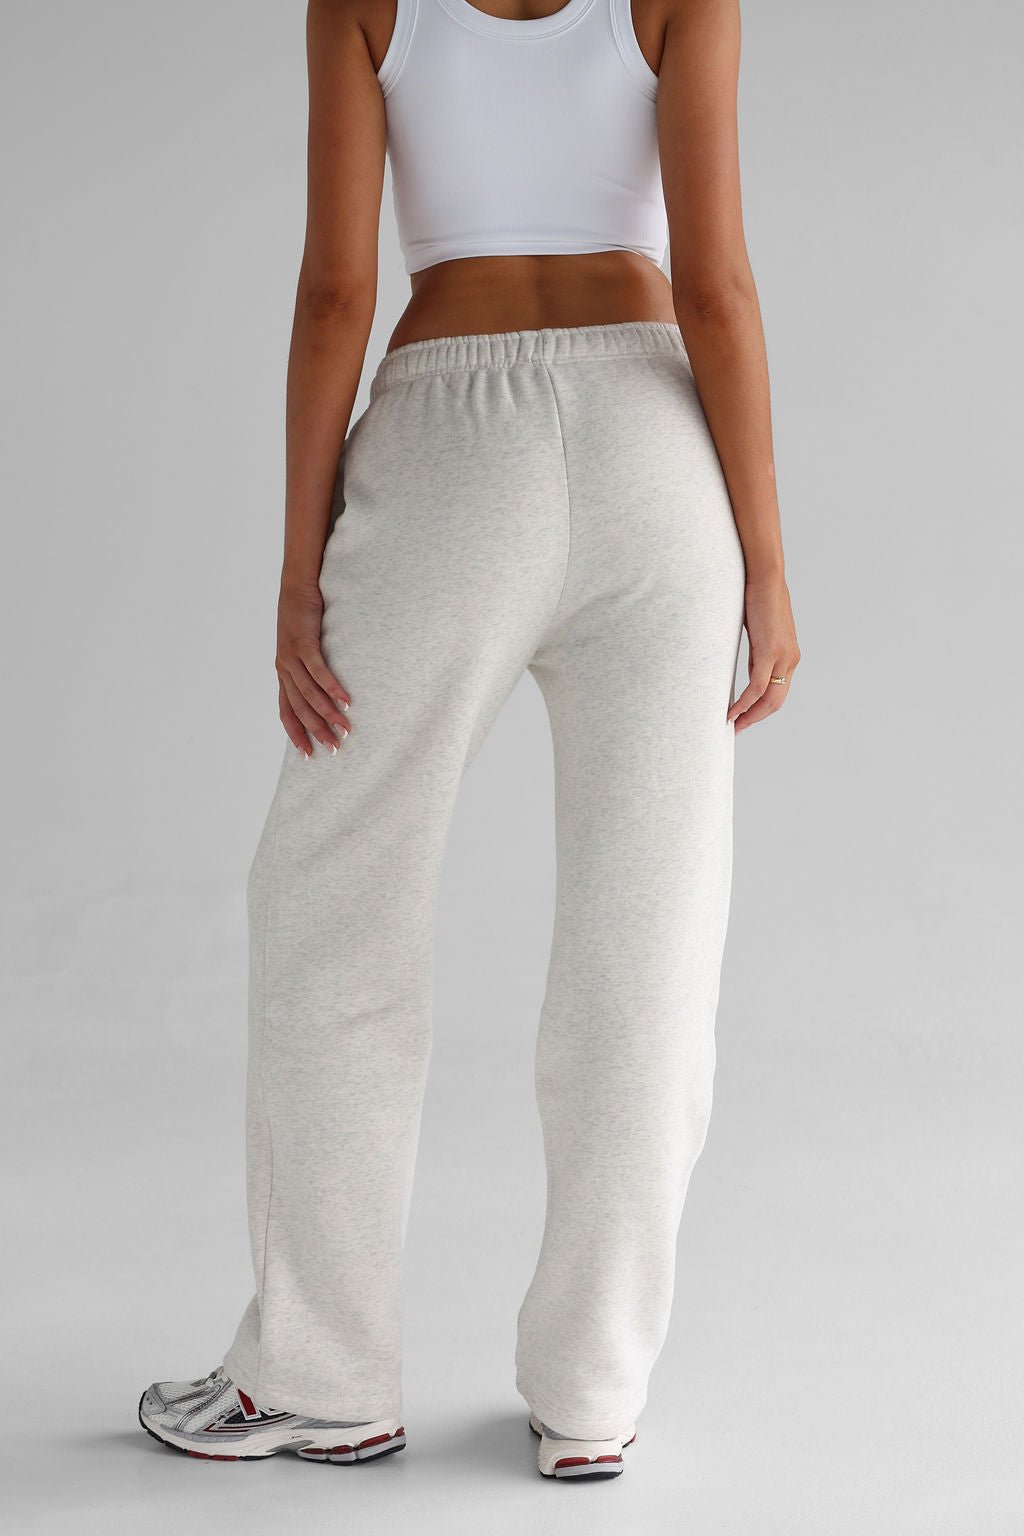 The Pilates Collection Relaxed Fit Sweatpants - Oatmeal - LEELO ACTIVE